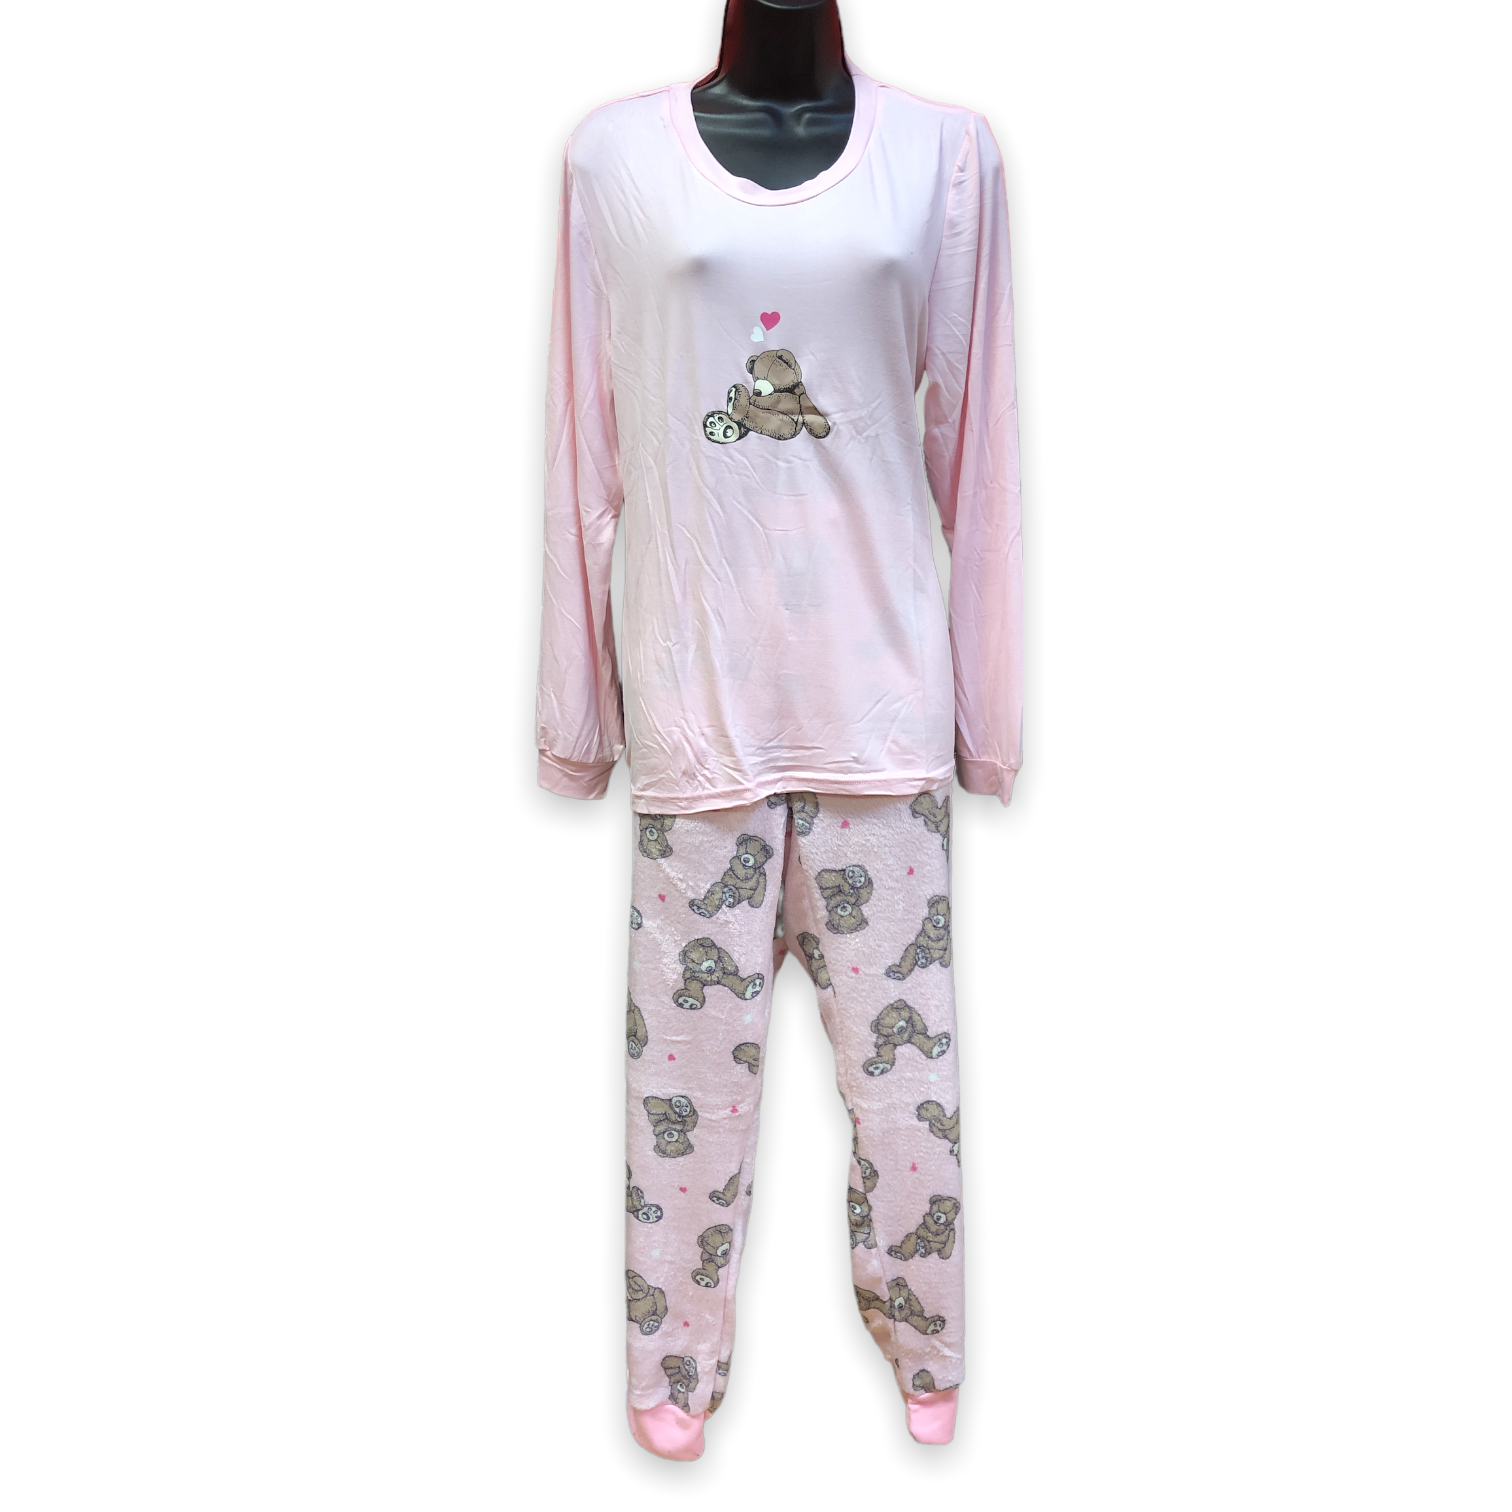 BULK BUY - Women's Two Piece Pajama Set with Jersey Knit Top & Plush Flannel Pants (6-Pack)